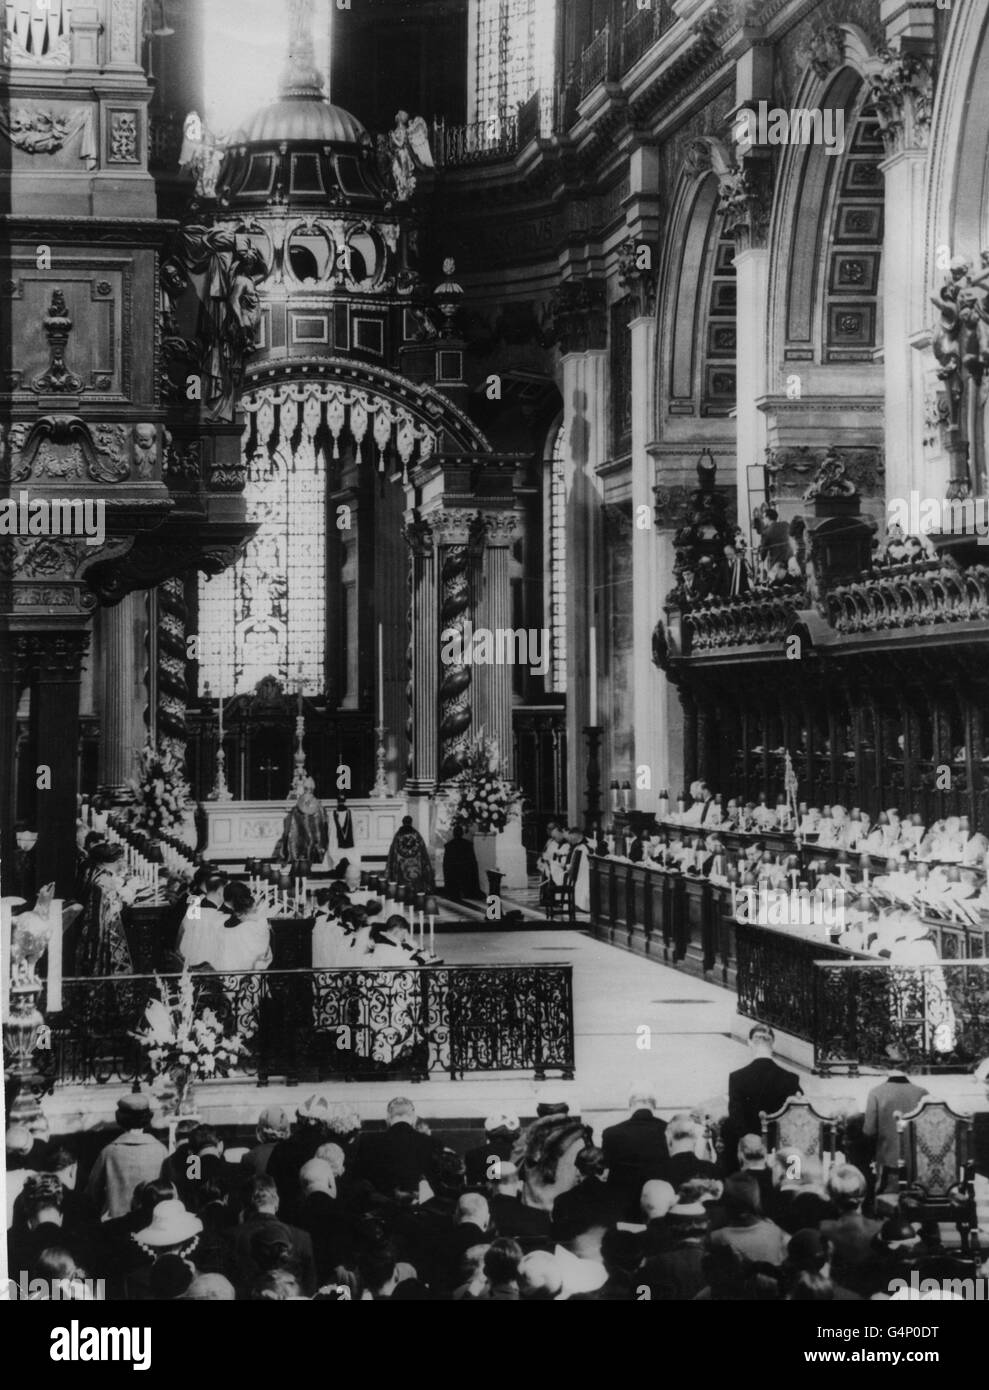 The scene in St Paul's Cathedral as the Archbishop of Canterbury, Dr. Geoffrey Fisher, gave his blessing during the rededication of the High Altar, which was damaged in London's wartime bombing. Facing the altar rails are the Queen and Duke of Edinburgh, kneeling in prayer. Stock Photo